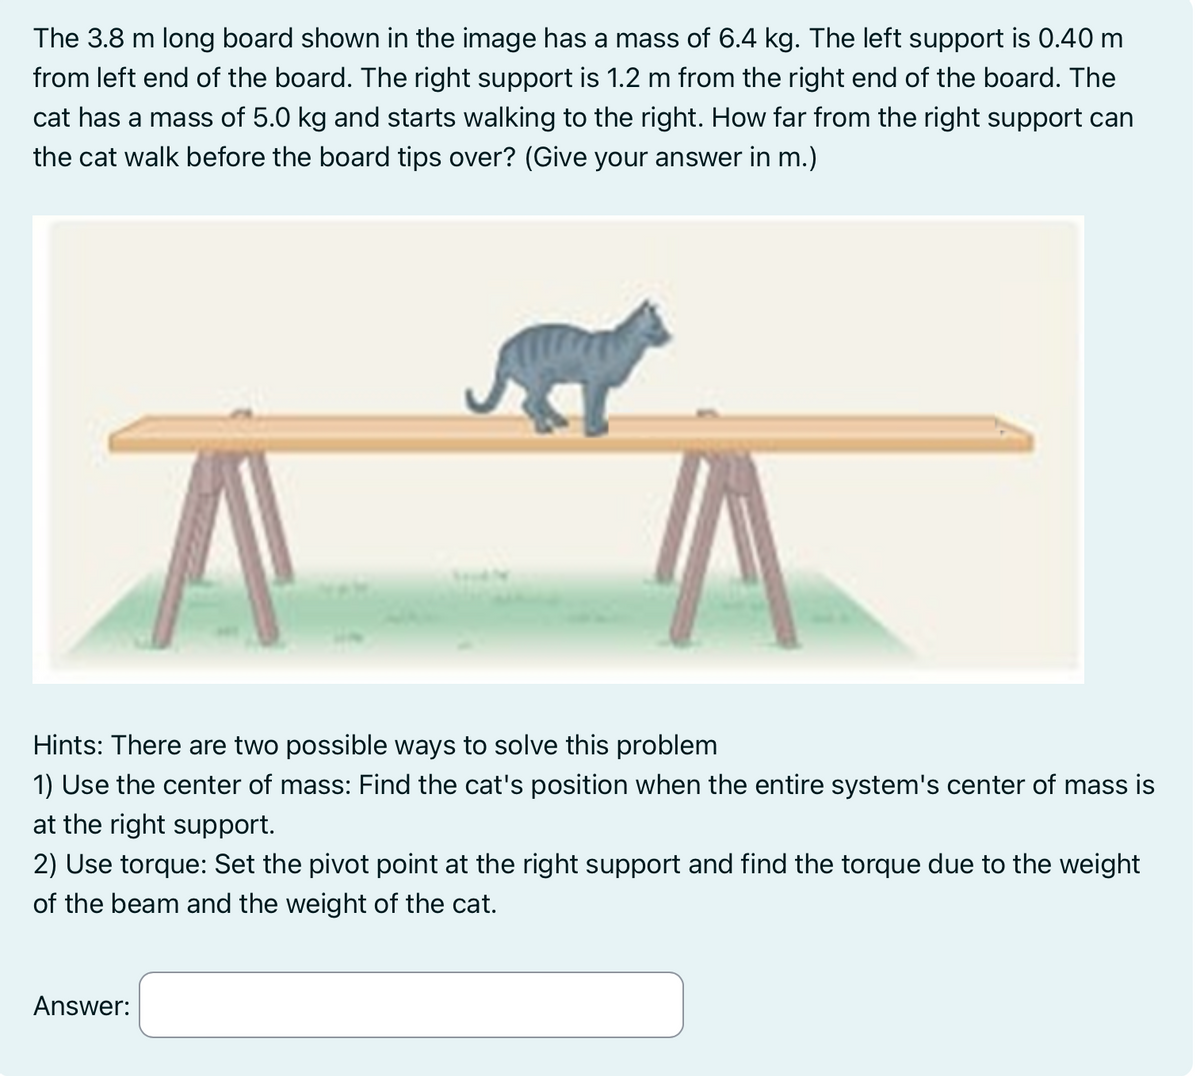 The 3.8 m long board shown in the image has a mass of 6.4 kg. The left support is 0.40 m
from left end of the board. The right support is 1.2 m from the right end of the board. The
cat has a mass of 5.0 kg and starts walking to the right. How far from the right support can
the cat walk before the board tips over? (Give your answer in m.)
Hints: There are two possible ways to solve this problem
1) Use the center of mass: Find the cat's position when the entire system's center of mass is
at the right support.
2) Use torque: Set the pivot point at the right support and find the torque due to the weight
of the beam and the weight of the cat.
Answer: